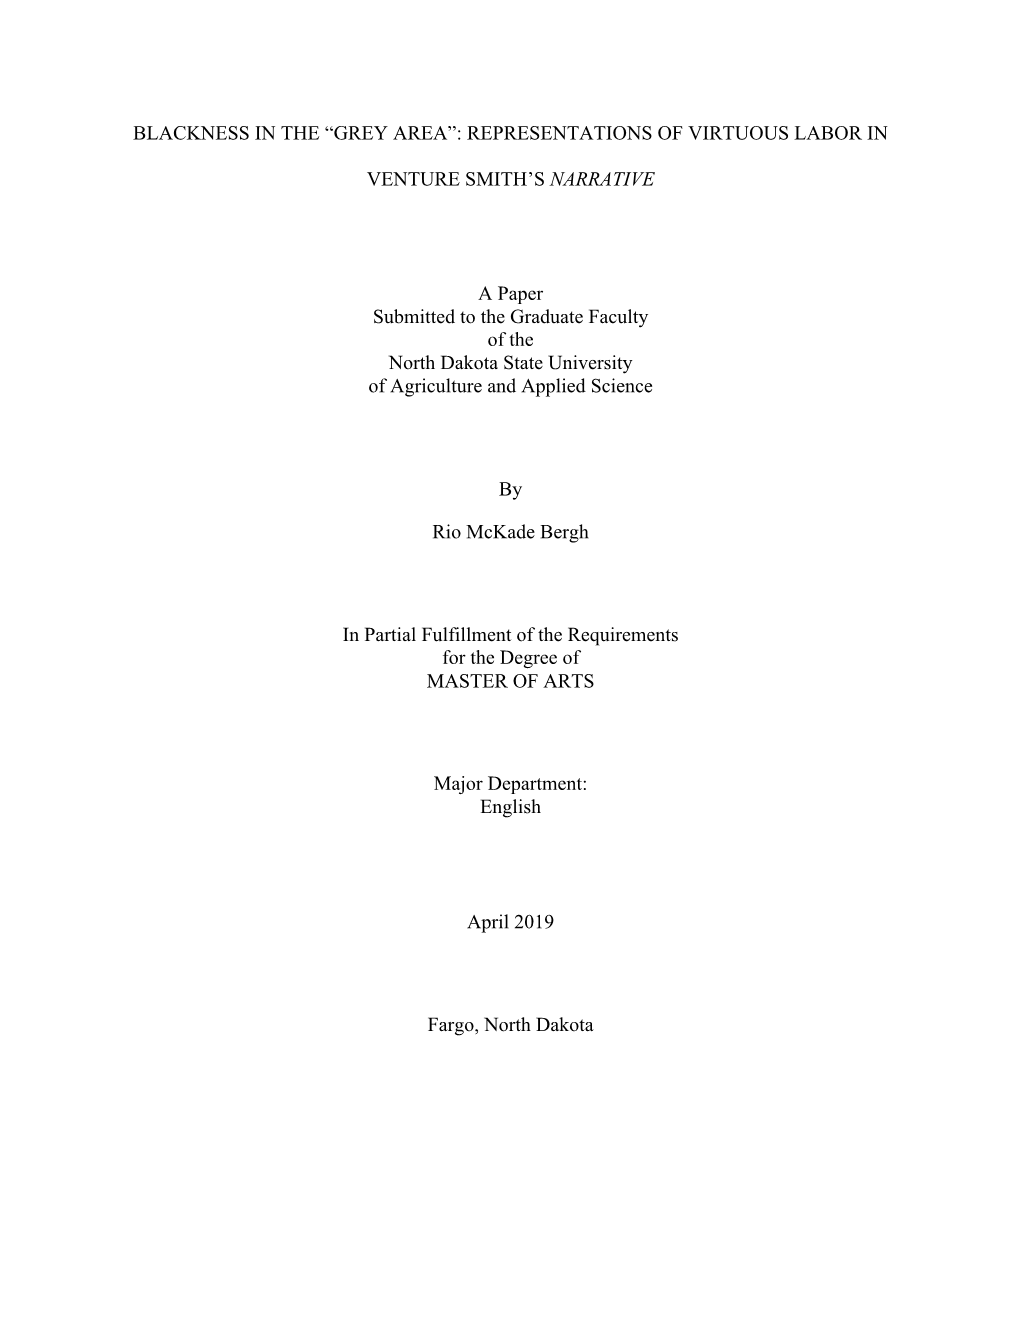 REPRESENTATIONS of VIRTUOUS LABOR in VENTURE SMITH's NARRATIVE a Paper Submitted to the Grad